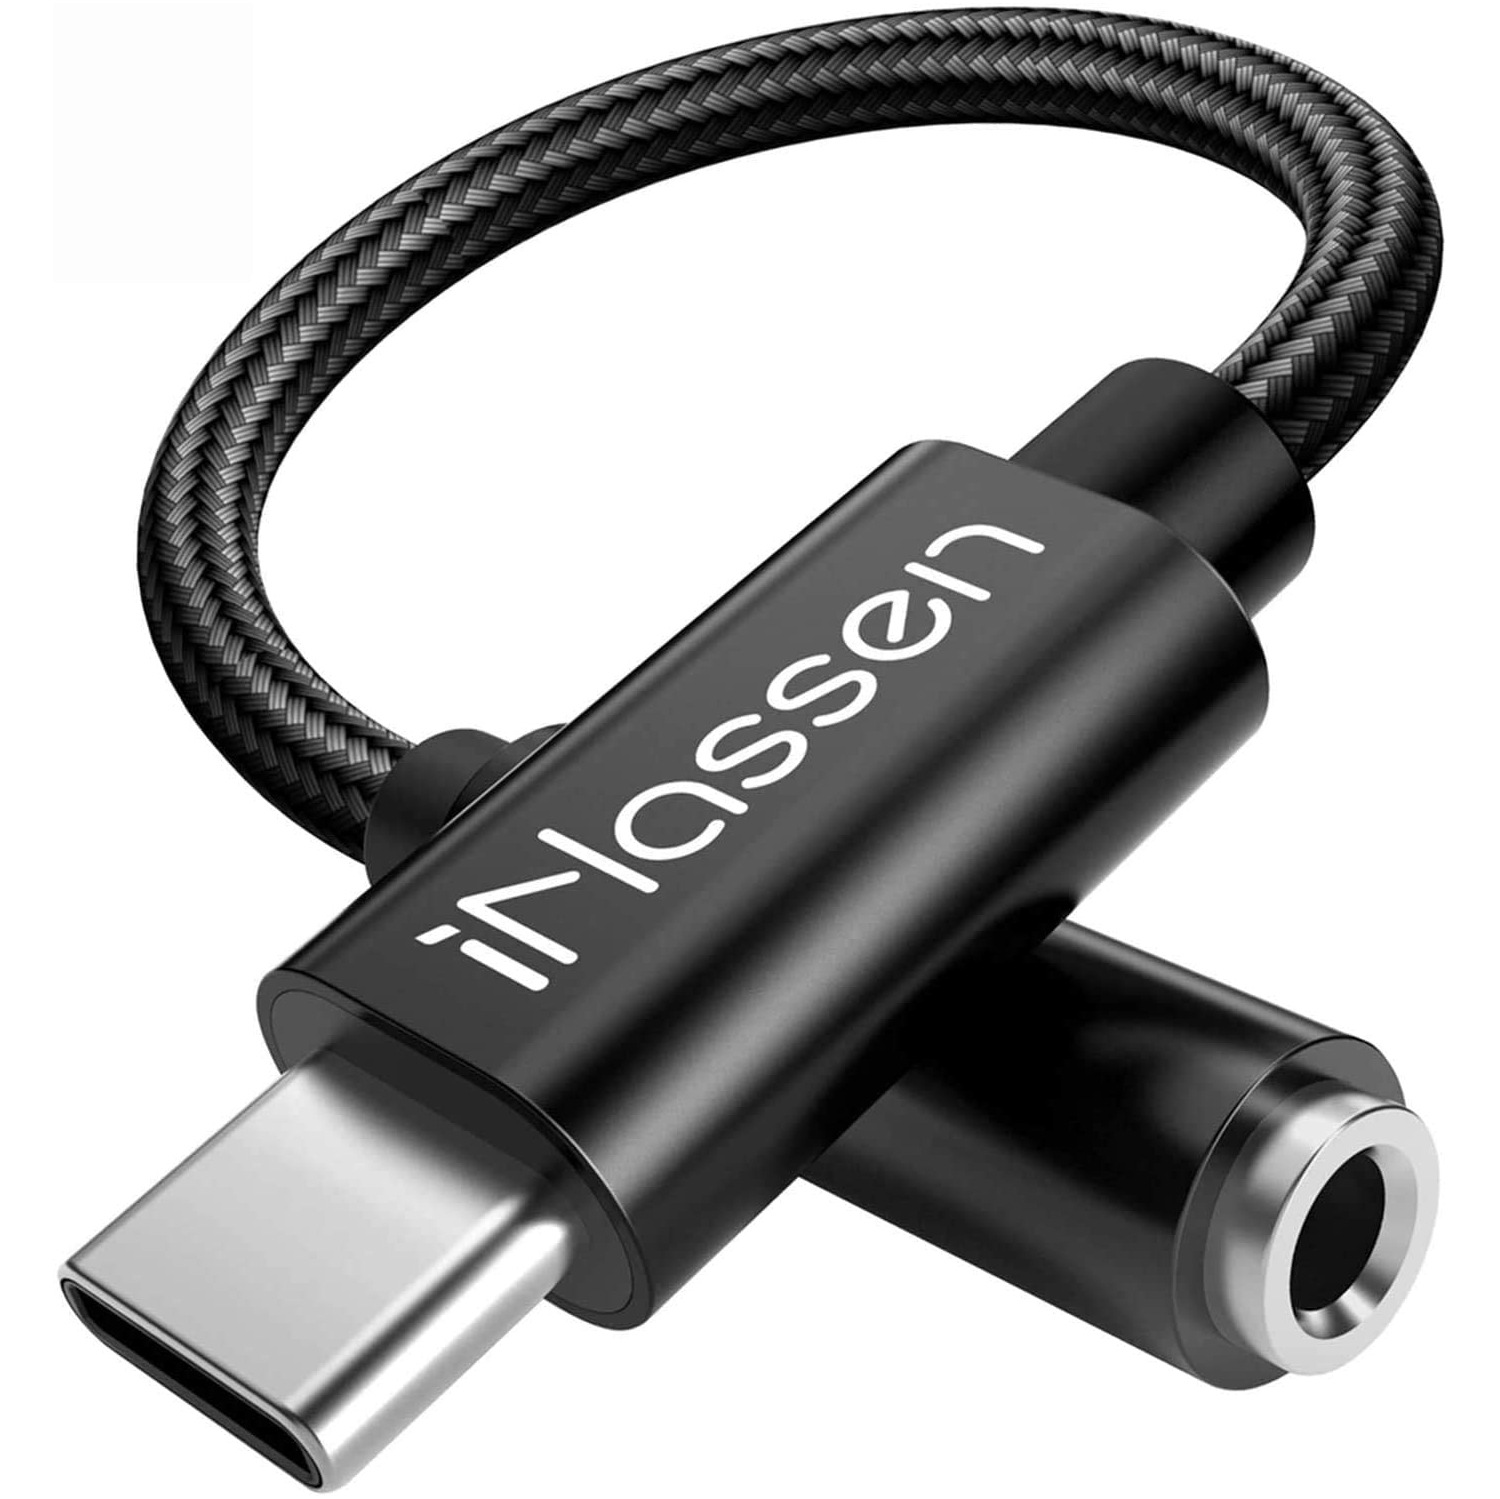 USB Type C to 3.5mm Female Headphone Jack Adapter, iNassen USB C to Aux Audio Dongle Cable Hi-Res DAC Cord Compatible with Pixel 4 3 XL/iPad Pro/HTC/Huawei/Oneplus/Samsung Galaxy Note 10 and More